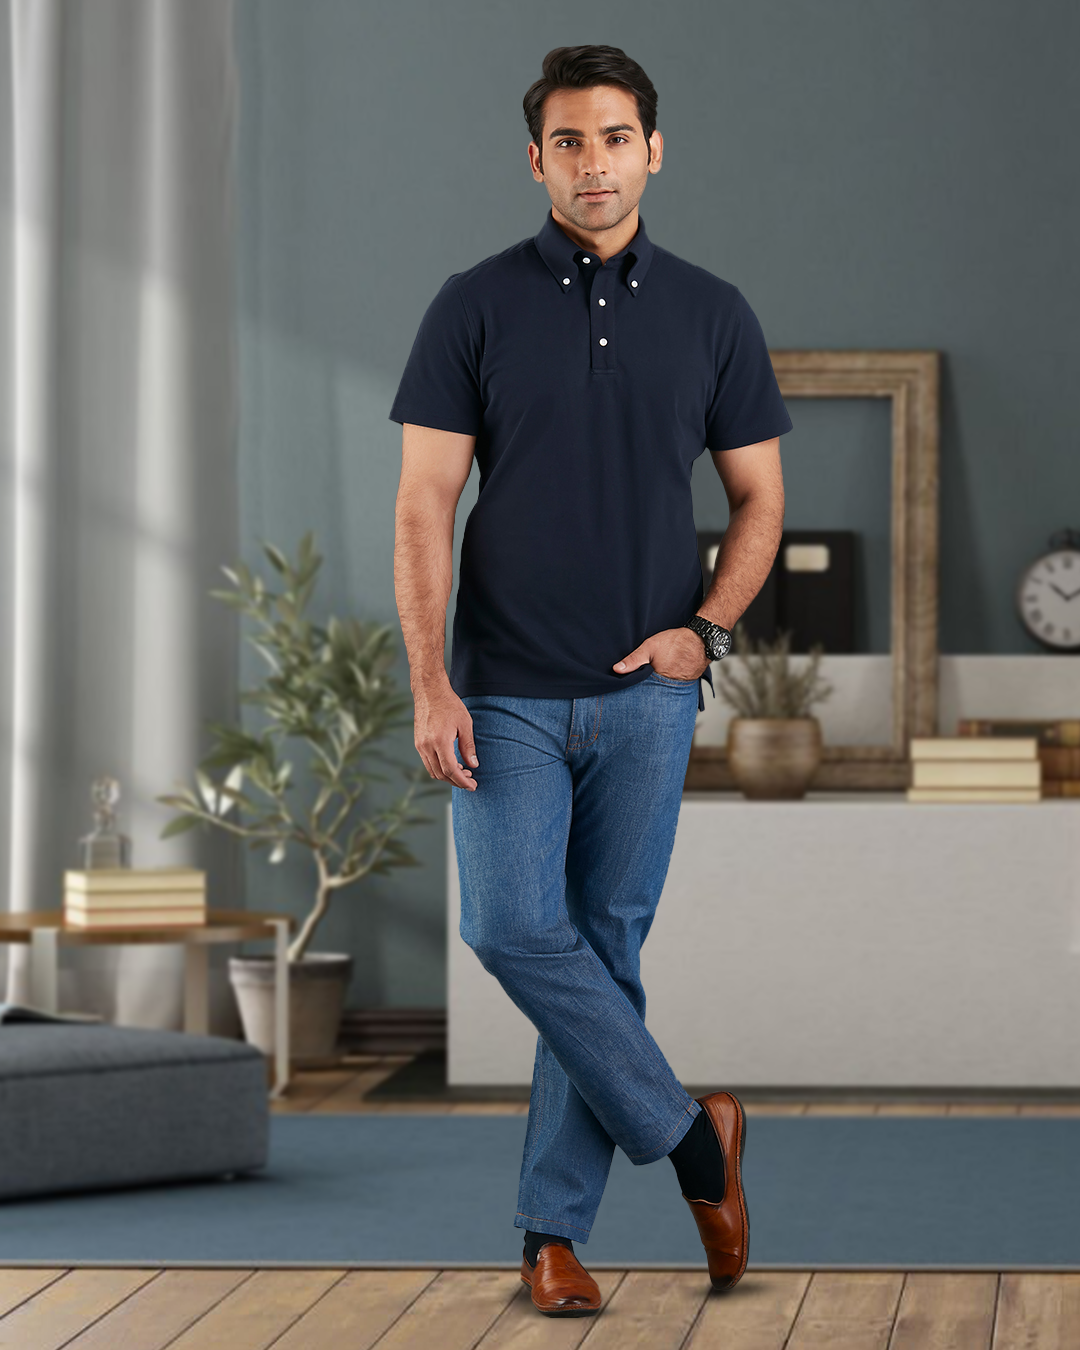 Model wearing the custom oxford polo shirt for men by Luxire in navy one hand in pocket